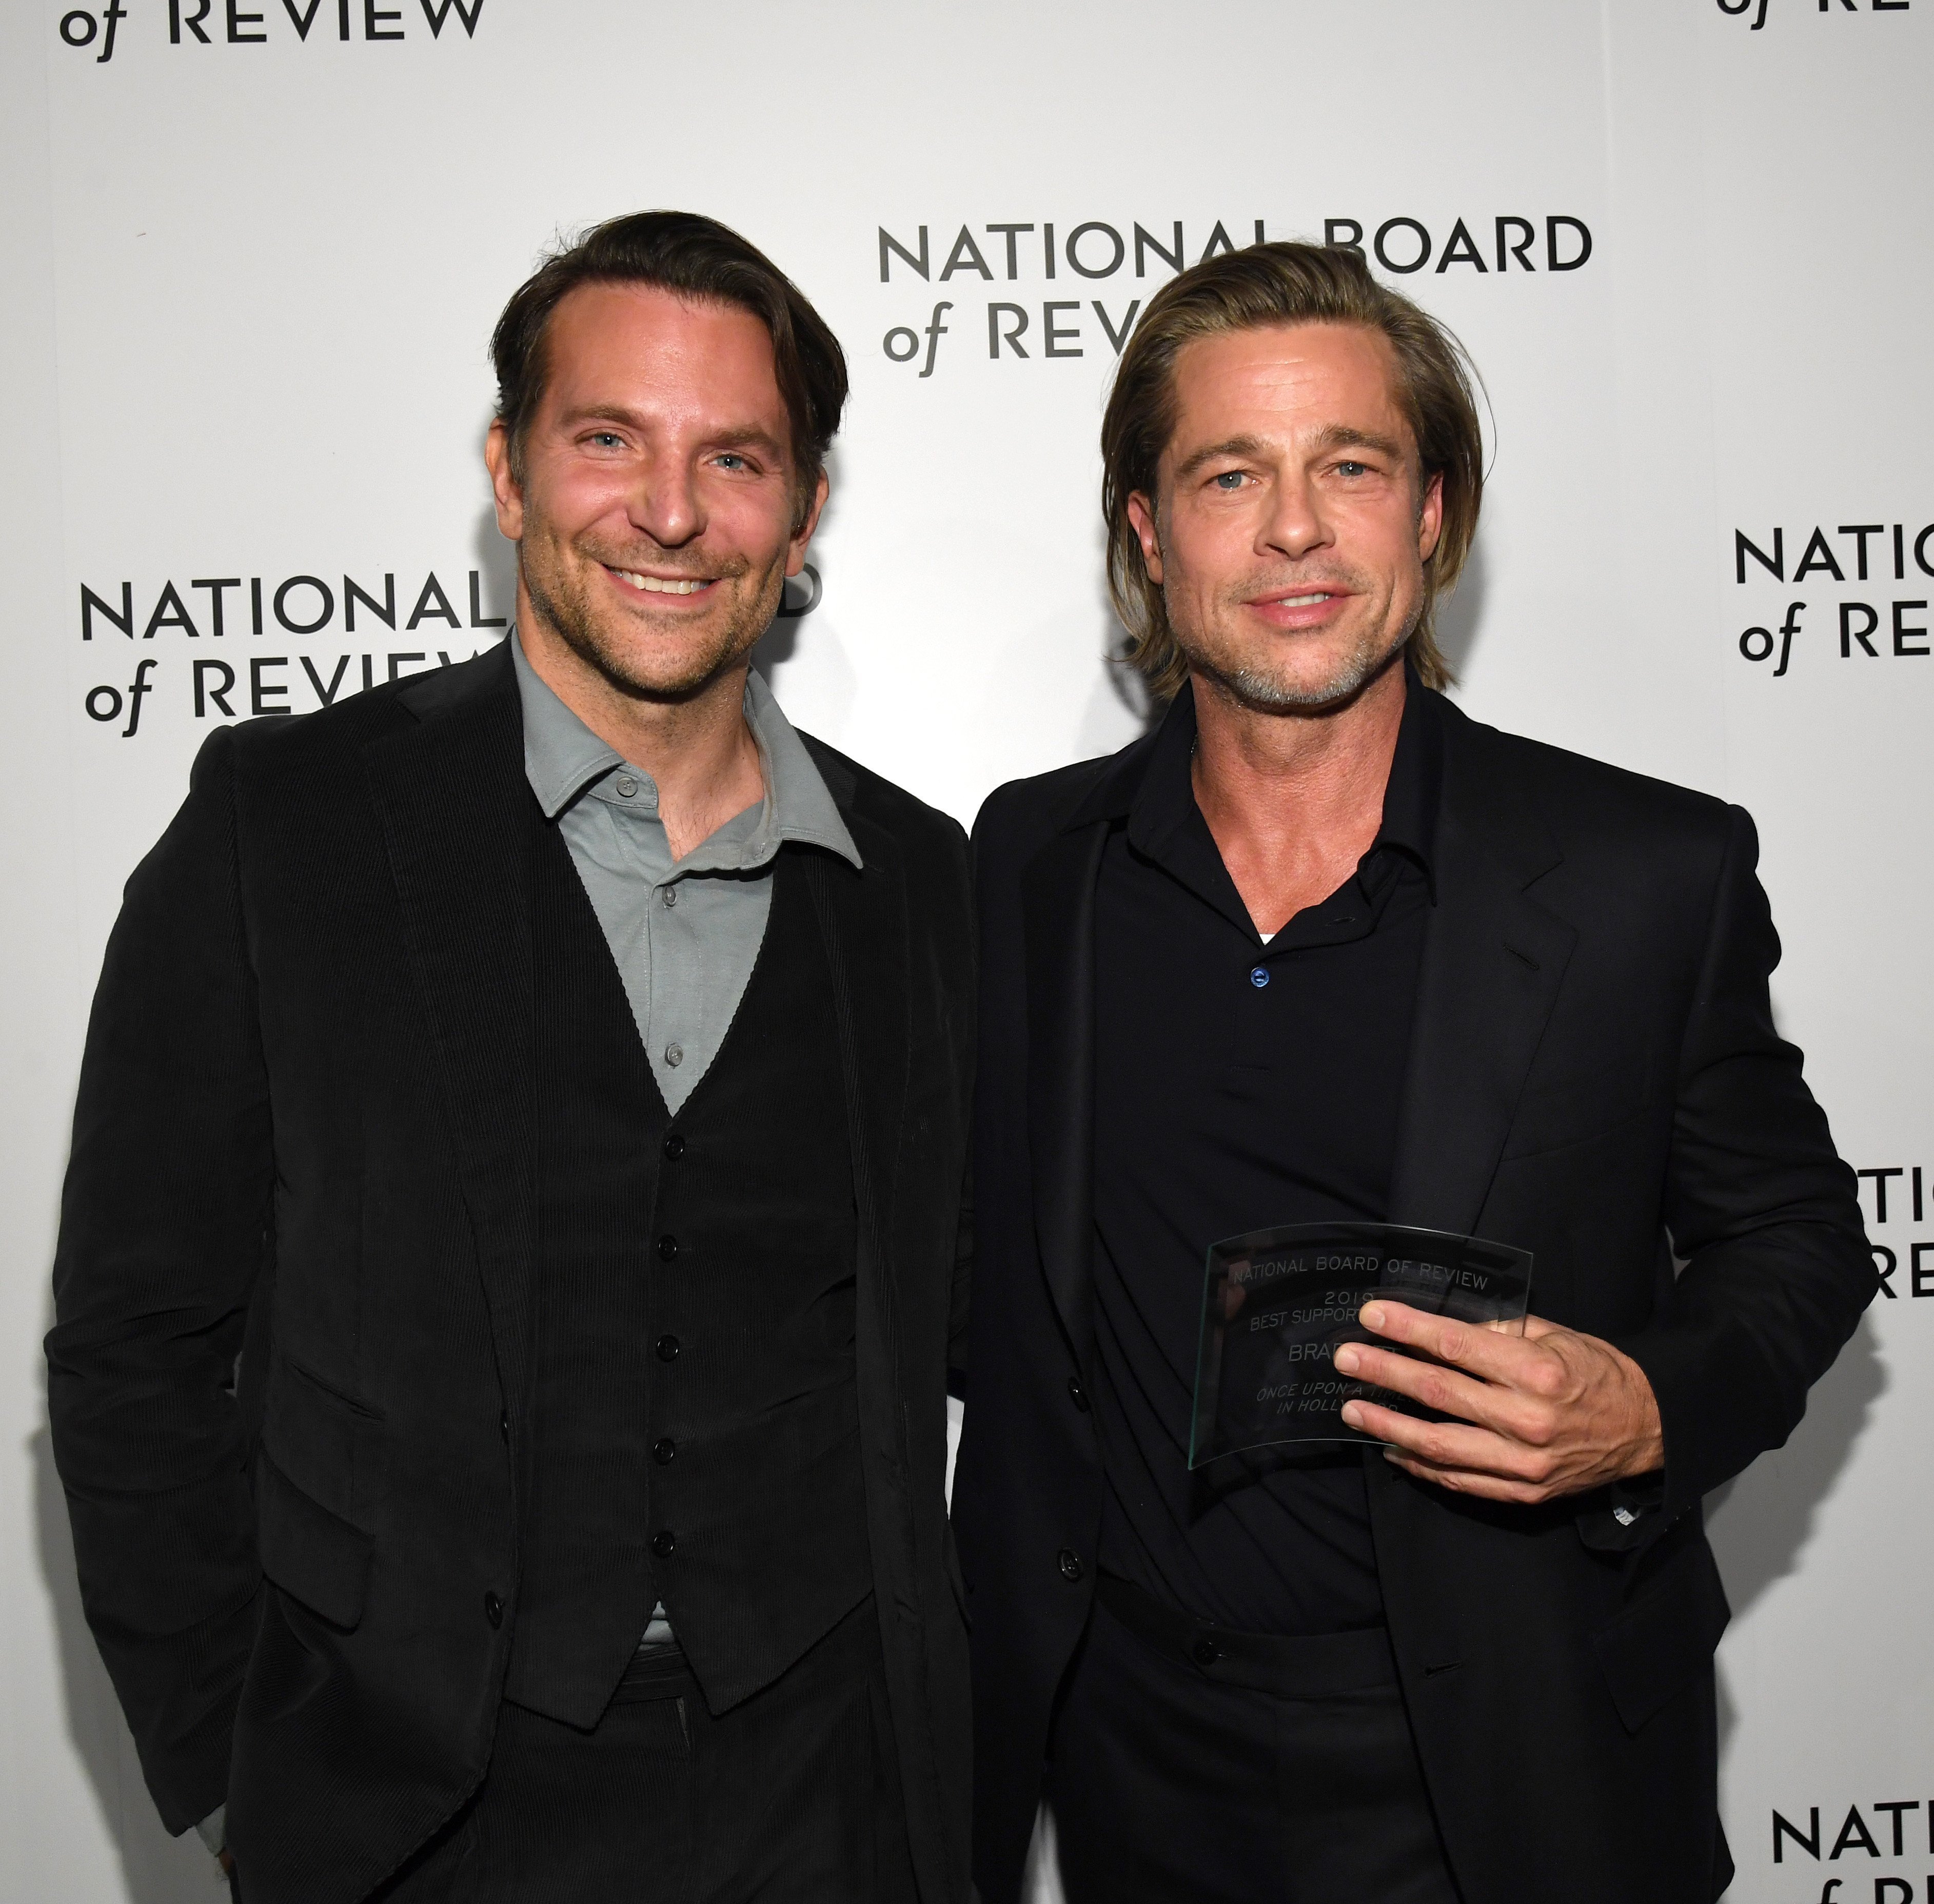 Bradley Cooper and Brad Pitt attend The National Board of Review Annual Awards Gala on January 08, 2020, in New York City. | Source: Getty Images.